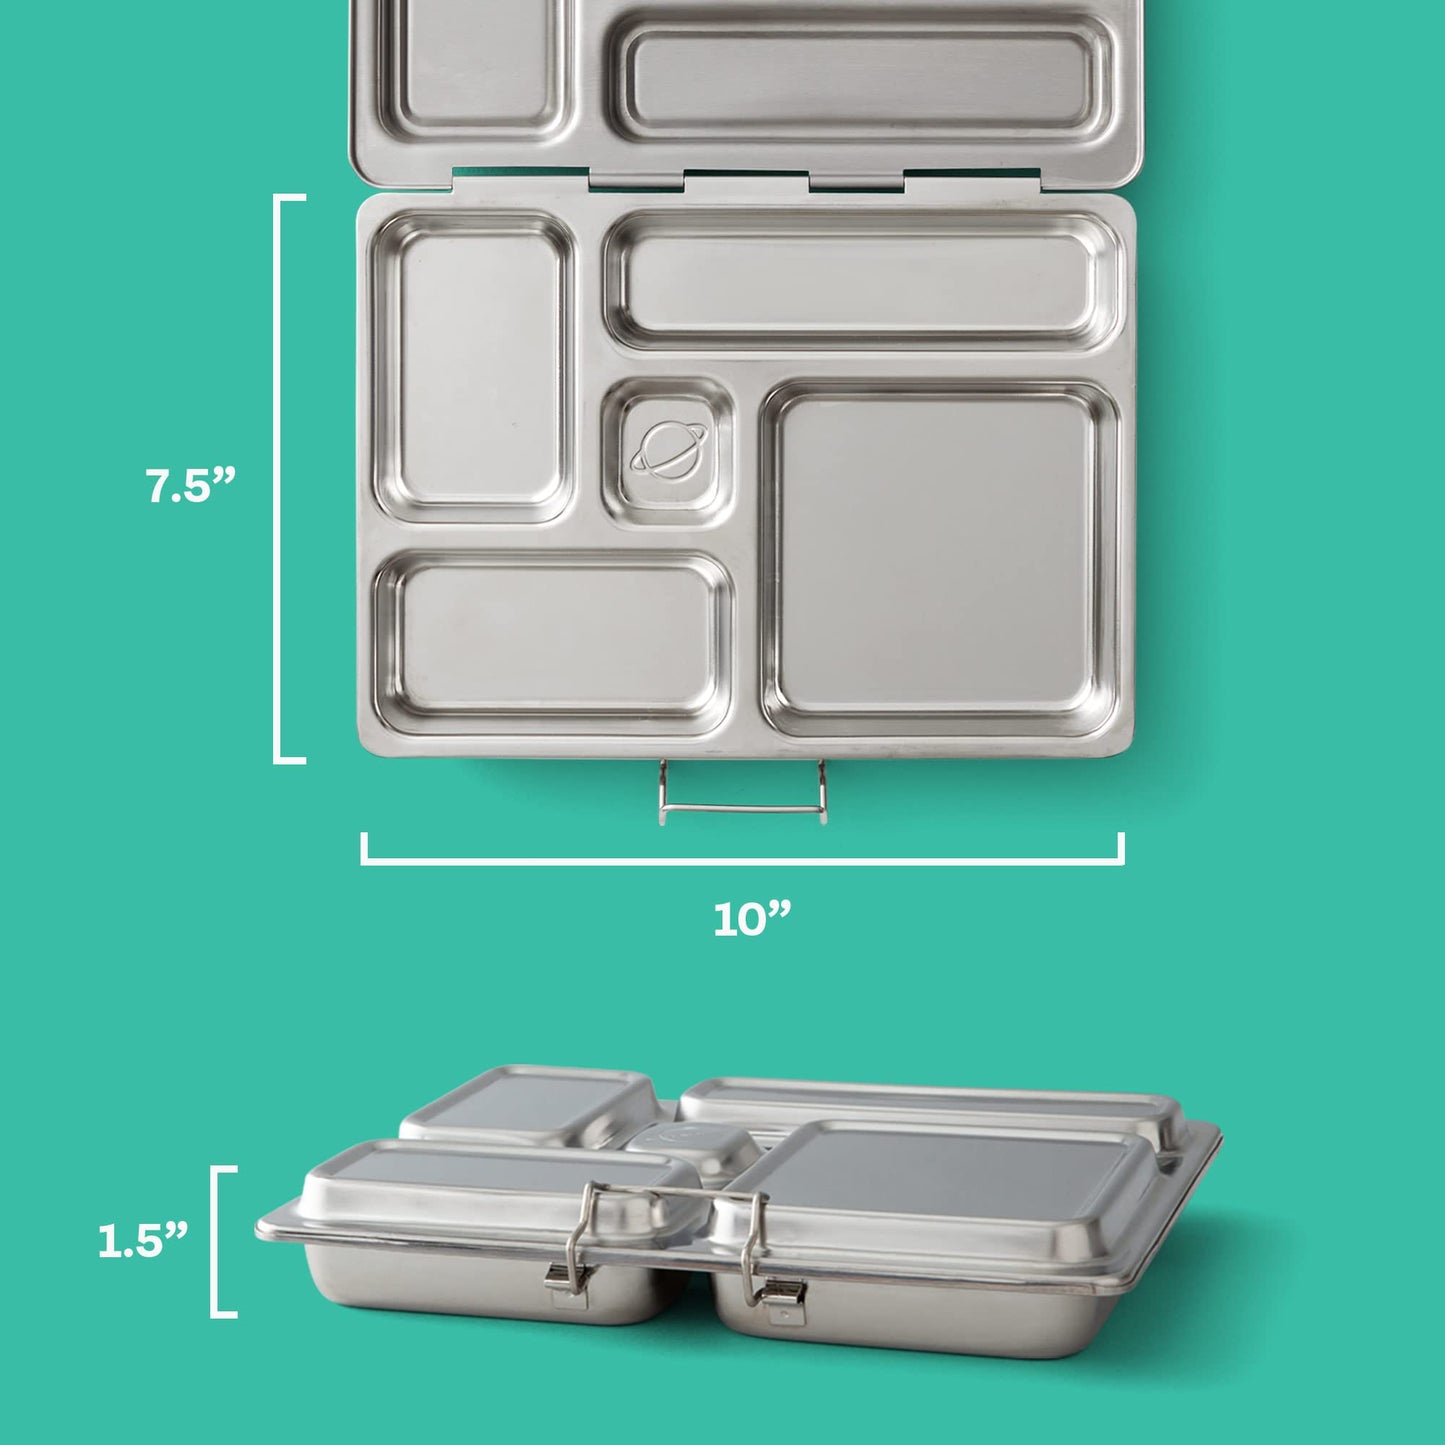 PlanetBox Rover Stainless Steel Bento Lunch Box with 5 Compartments for Adults and Kids, Sharks Carry Bag and Magnets